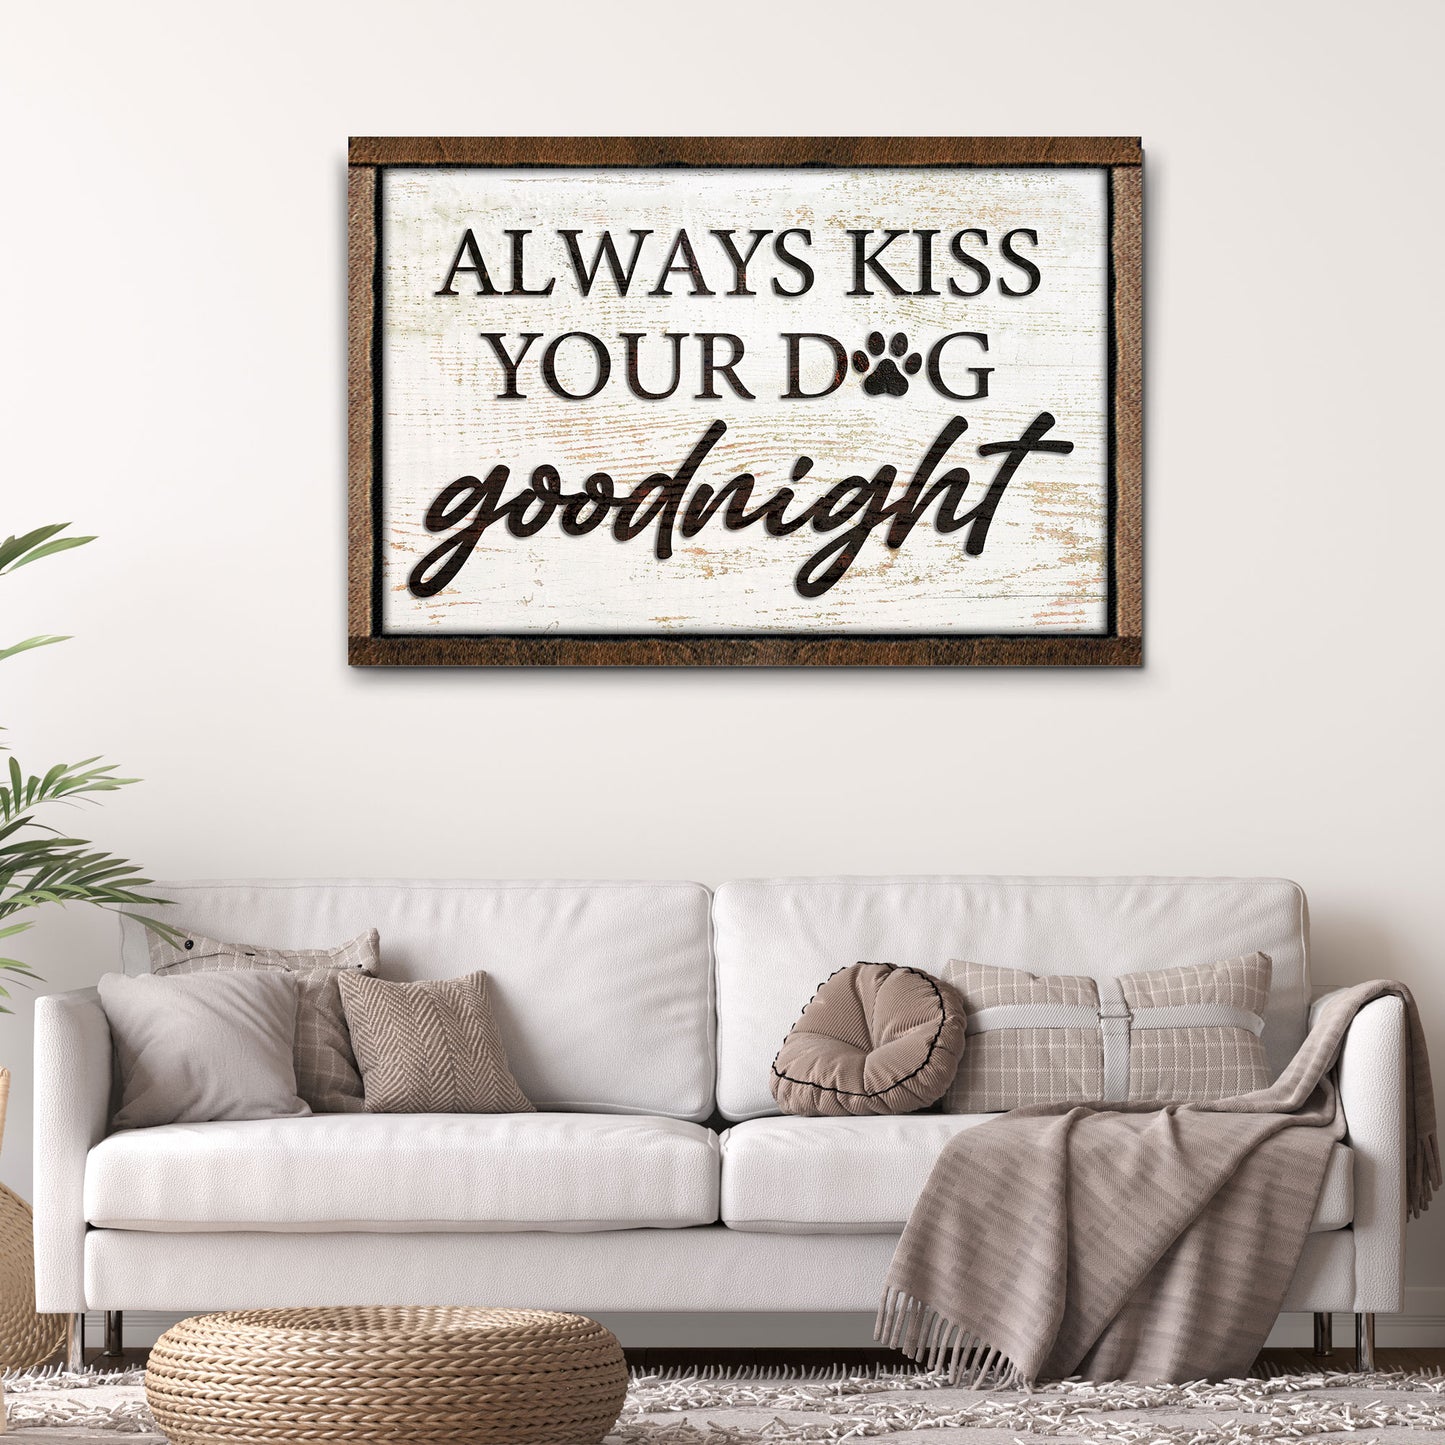 Always Kiss Your Dog Goodnight Sign III - Image by Tailored Canvases